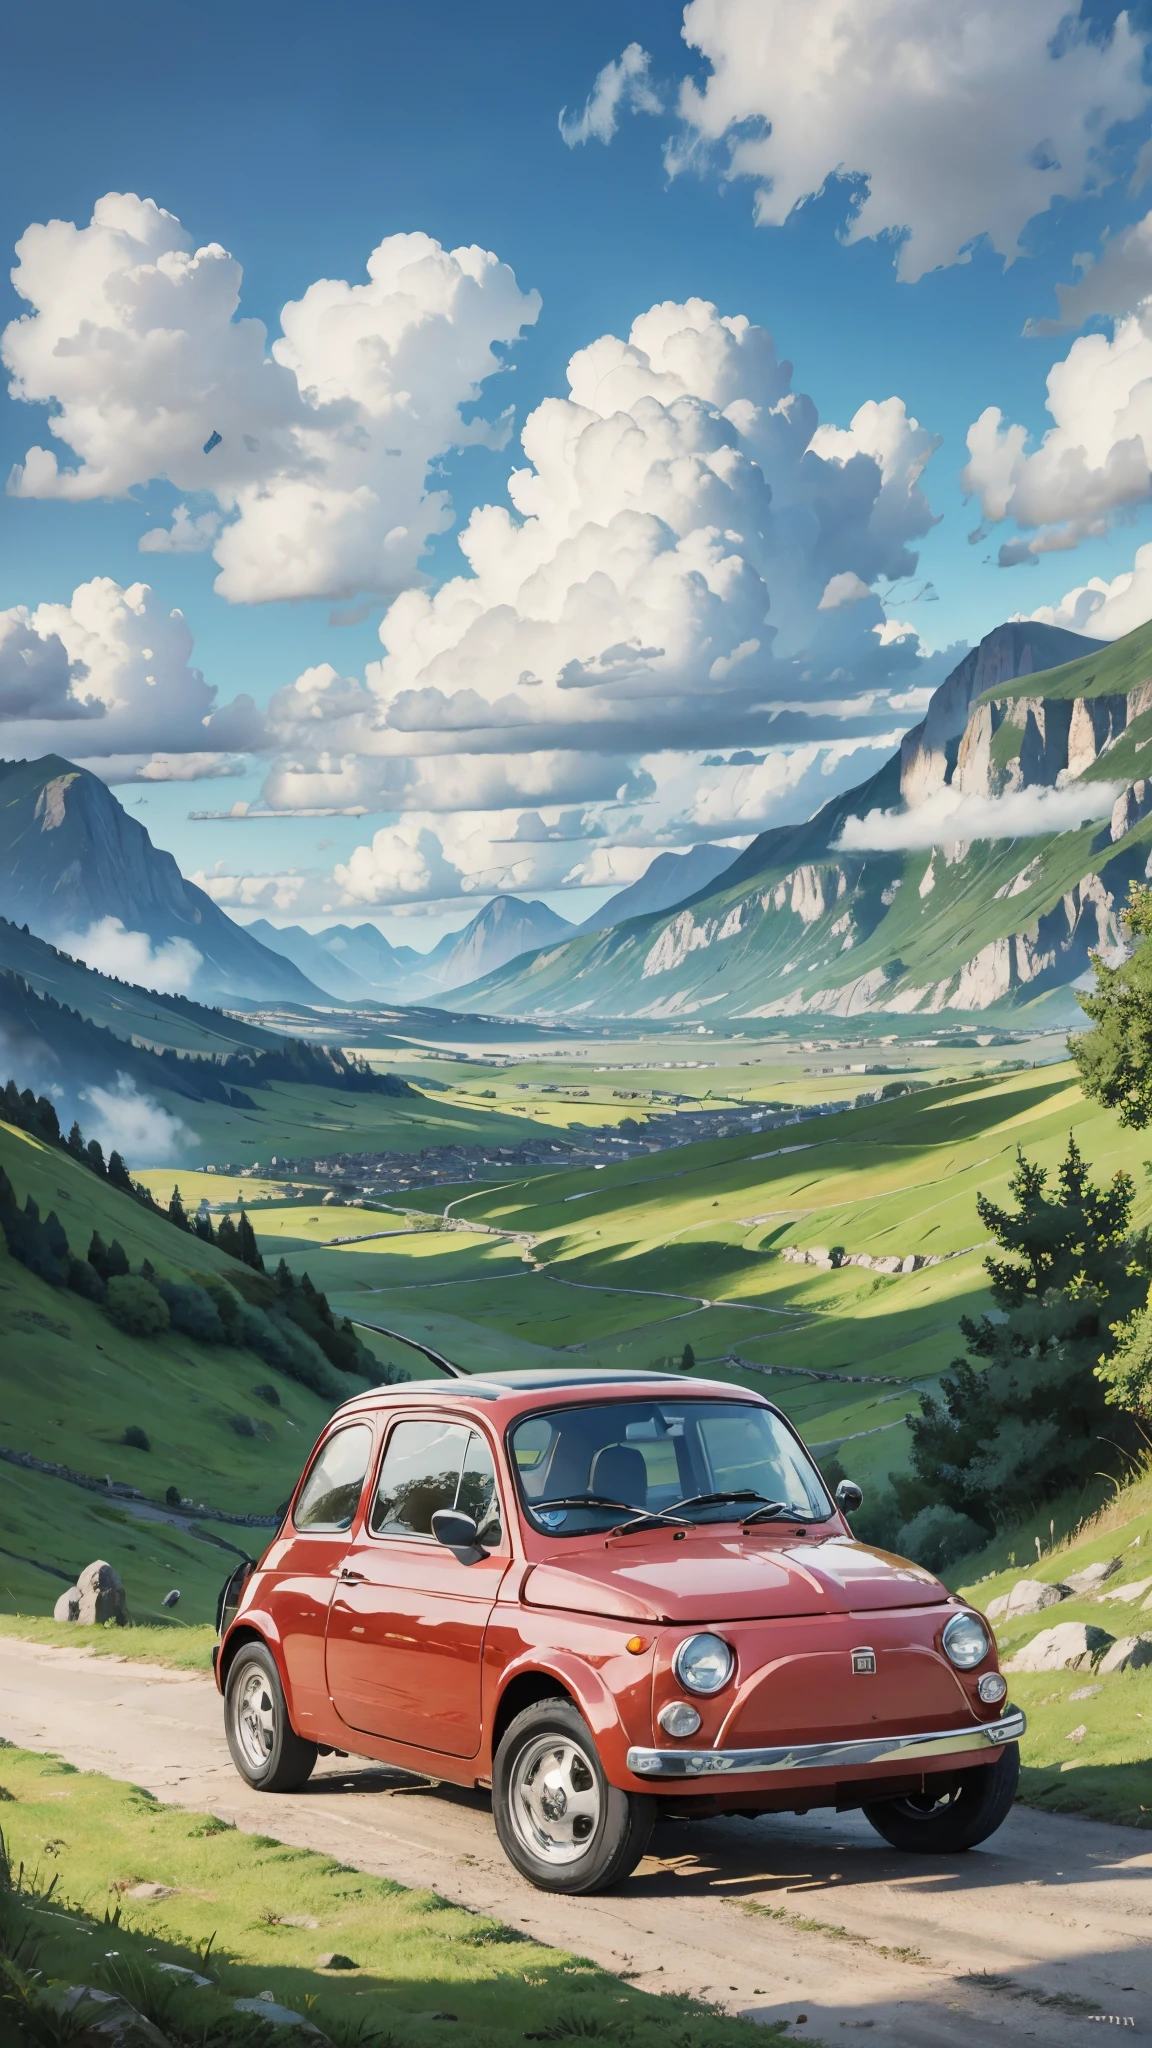 (masterpiece:1.2, Highest quality),(Very detailed),(((Anime Style))),8k,wallpaper,Ultra-fine painting,Fiat 500,Run,Mountainous area,blue sky,(((Ghibli style)))